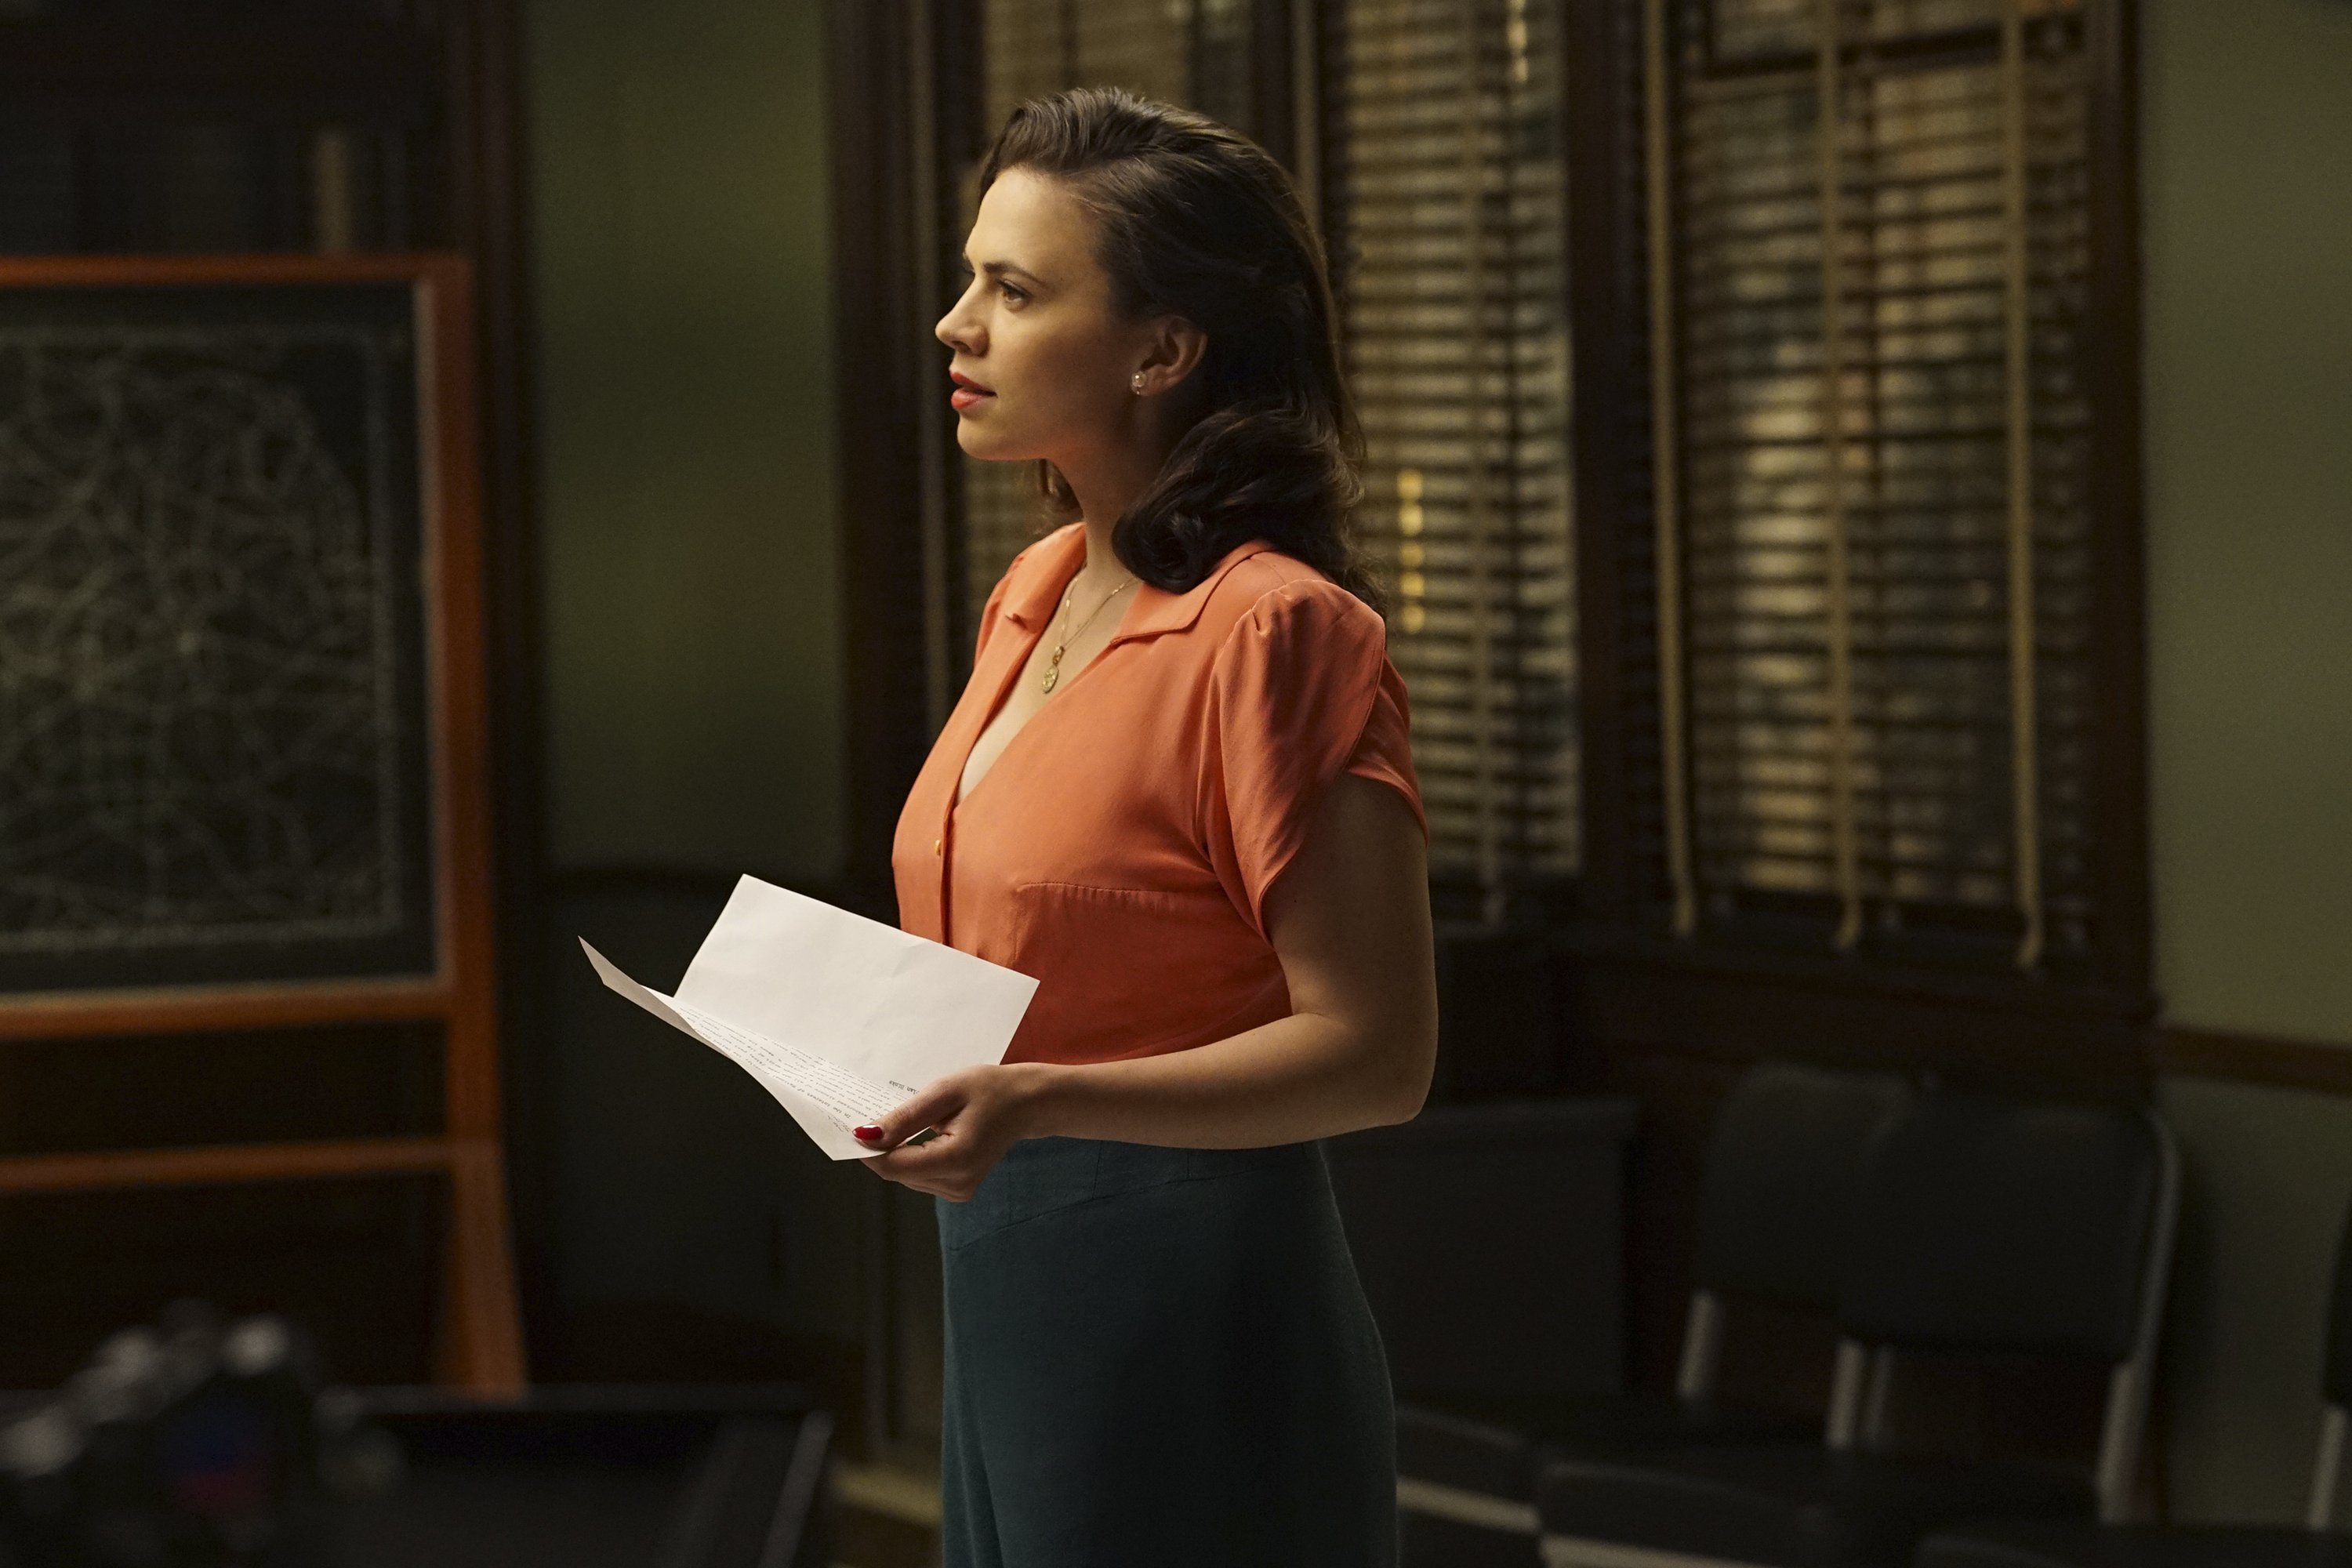 New Promotional Stills From Agent Carter Season 2 Episode 4 Smoke And Mirrors